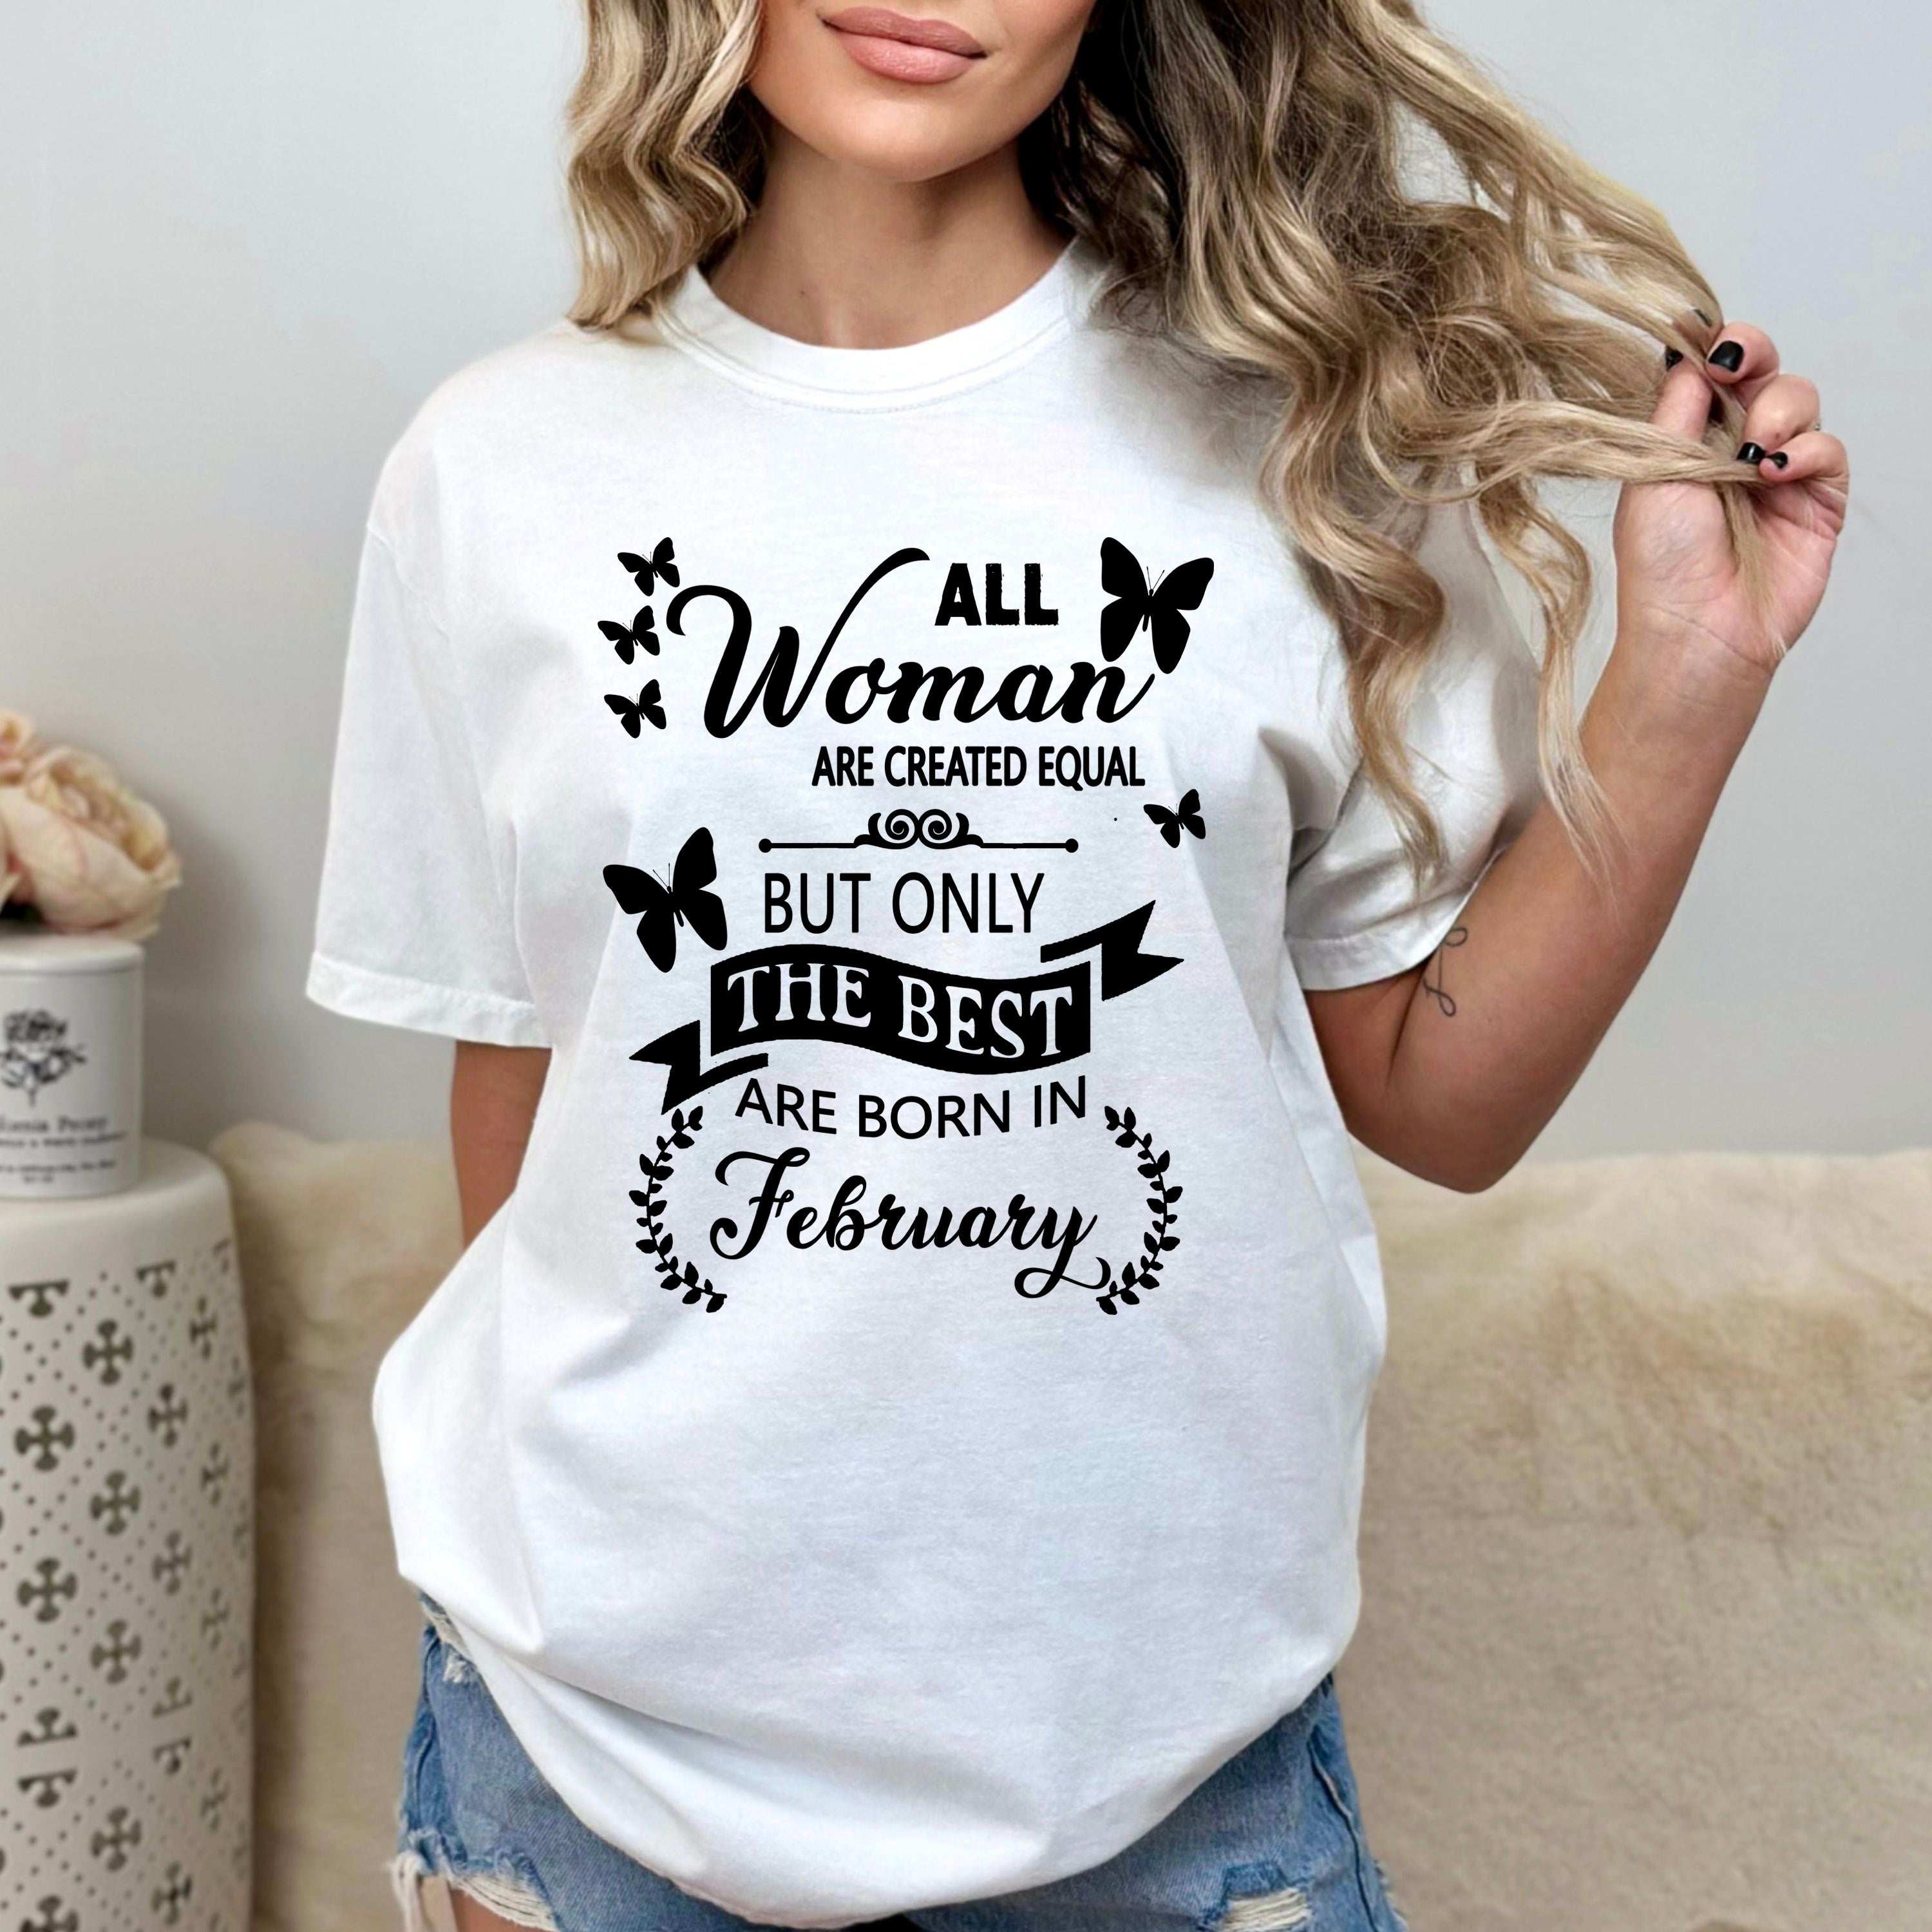 "All Woman Are Created Equal But The Best Are Born in February".